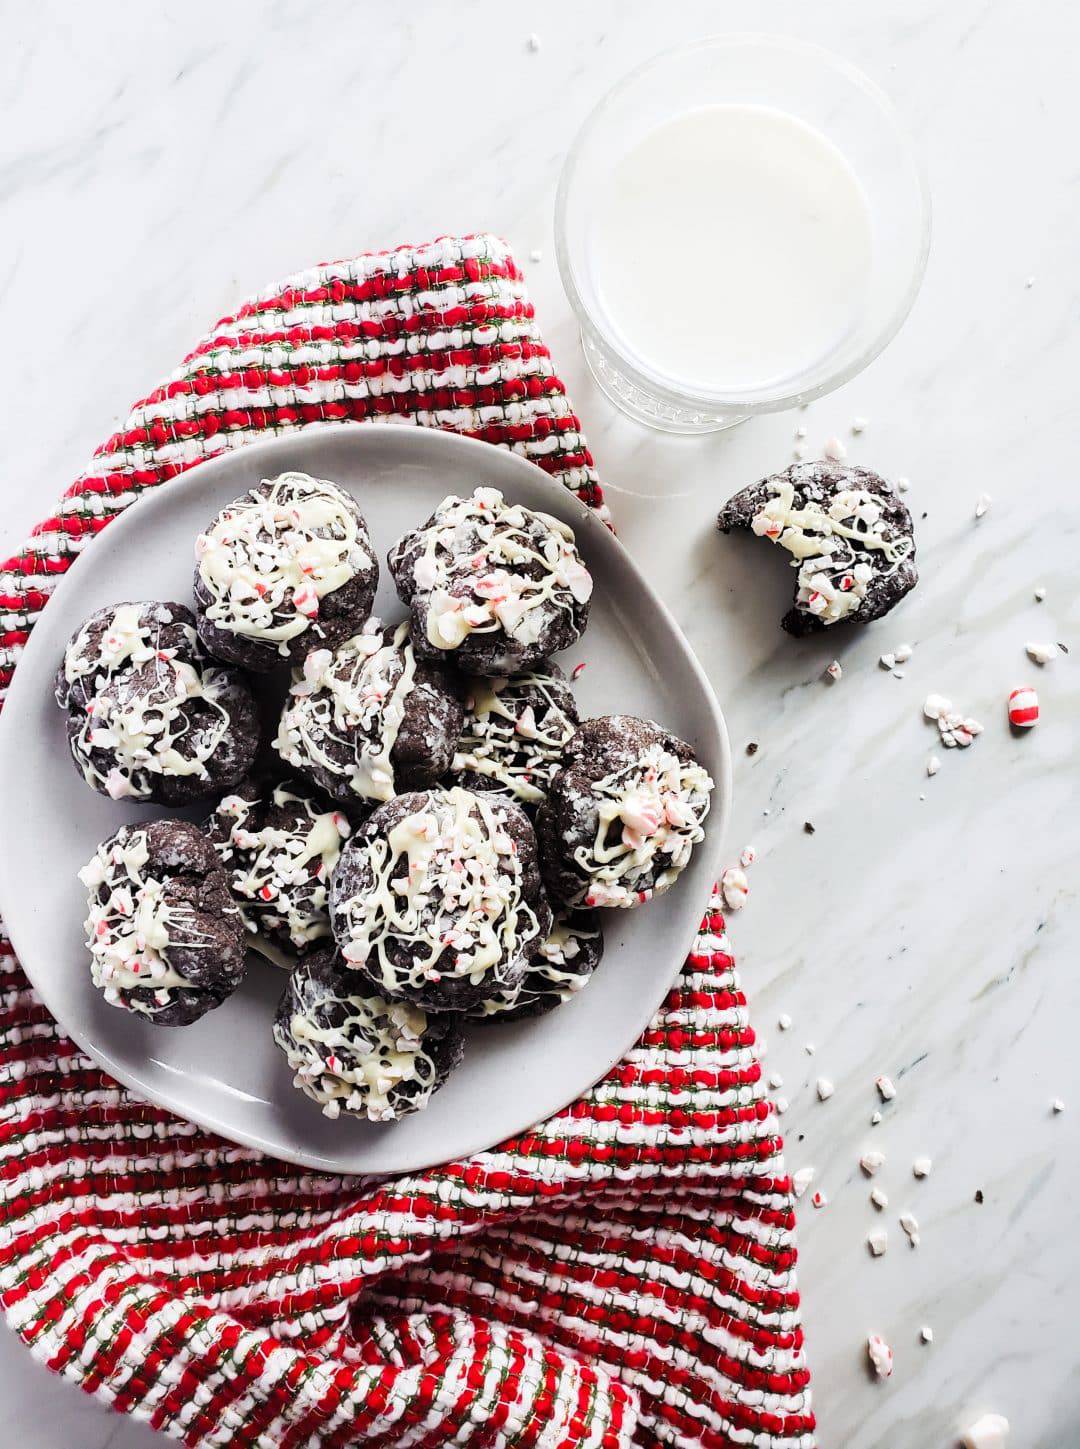 These Chocolate Cake Cookies with White Chocolate Peppermint Sprinkle is the perfect Christmas cookie recipe. These cookies use a boxed cake mix, cream cheese, butter and of course dark chocolate chips for the best flavor combination. You will love this easy baking recipe for the holiday season! #holidays #Christmas #Cookies #recipe #baking